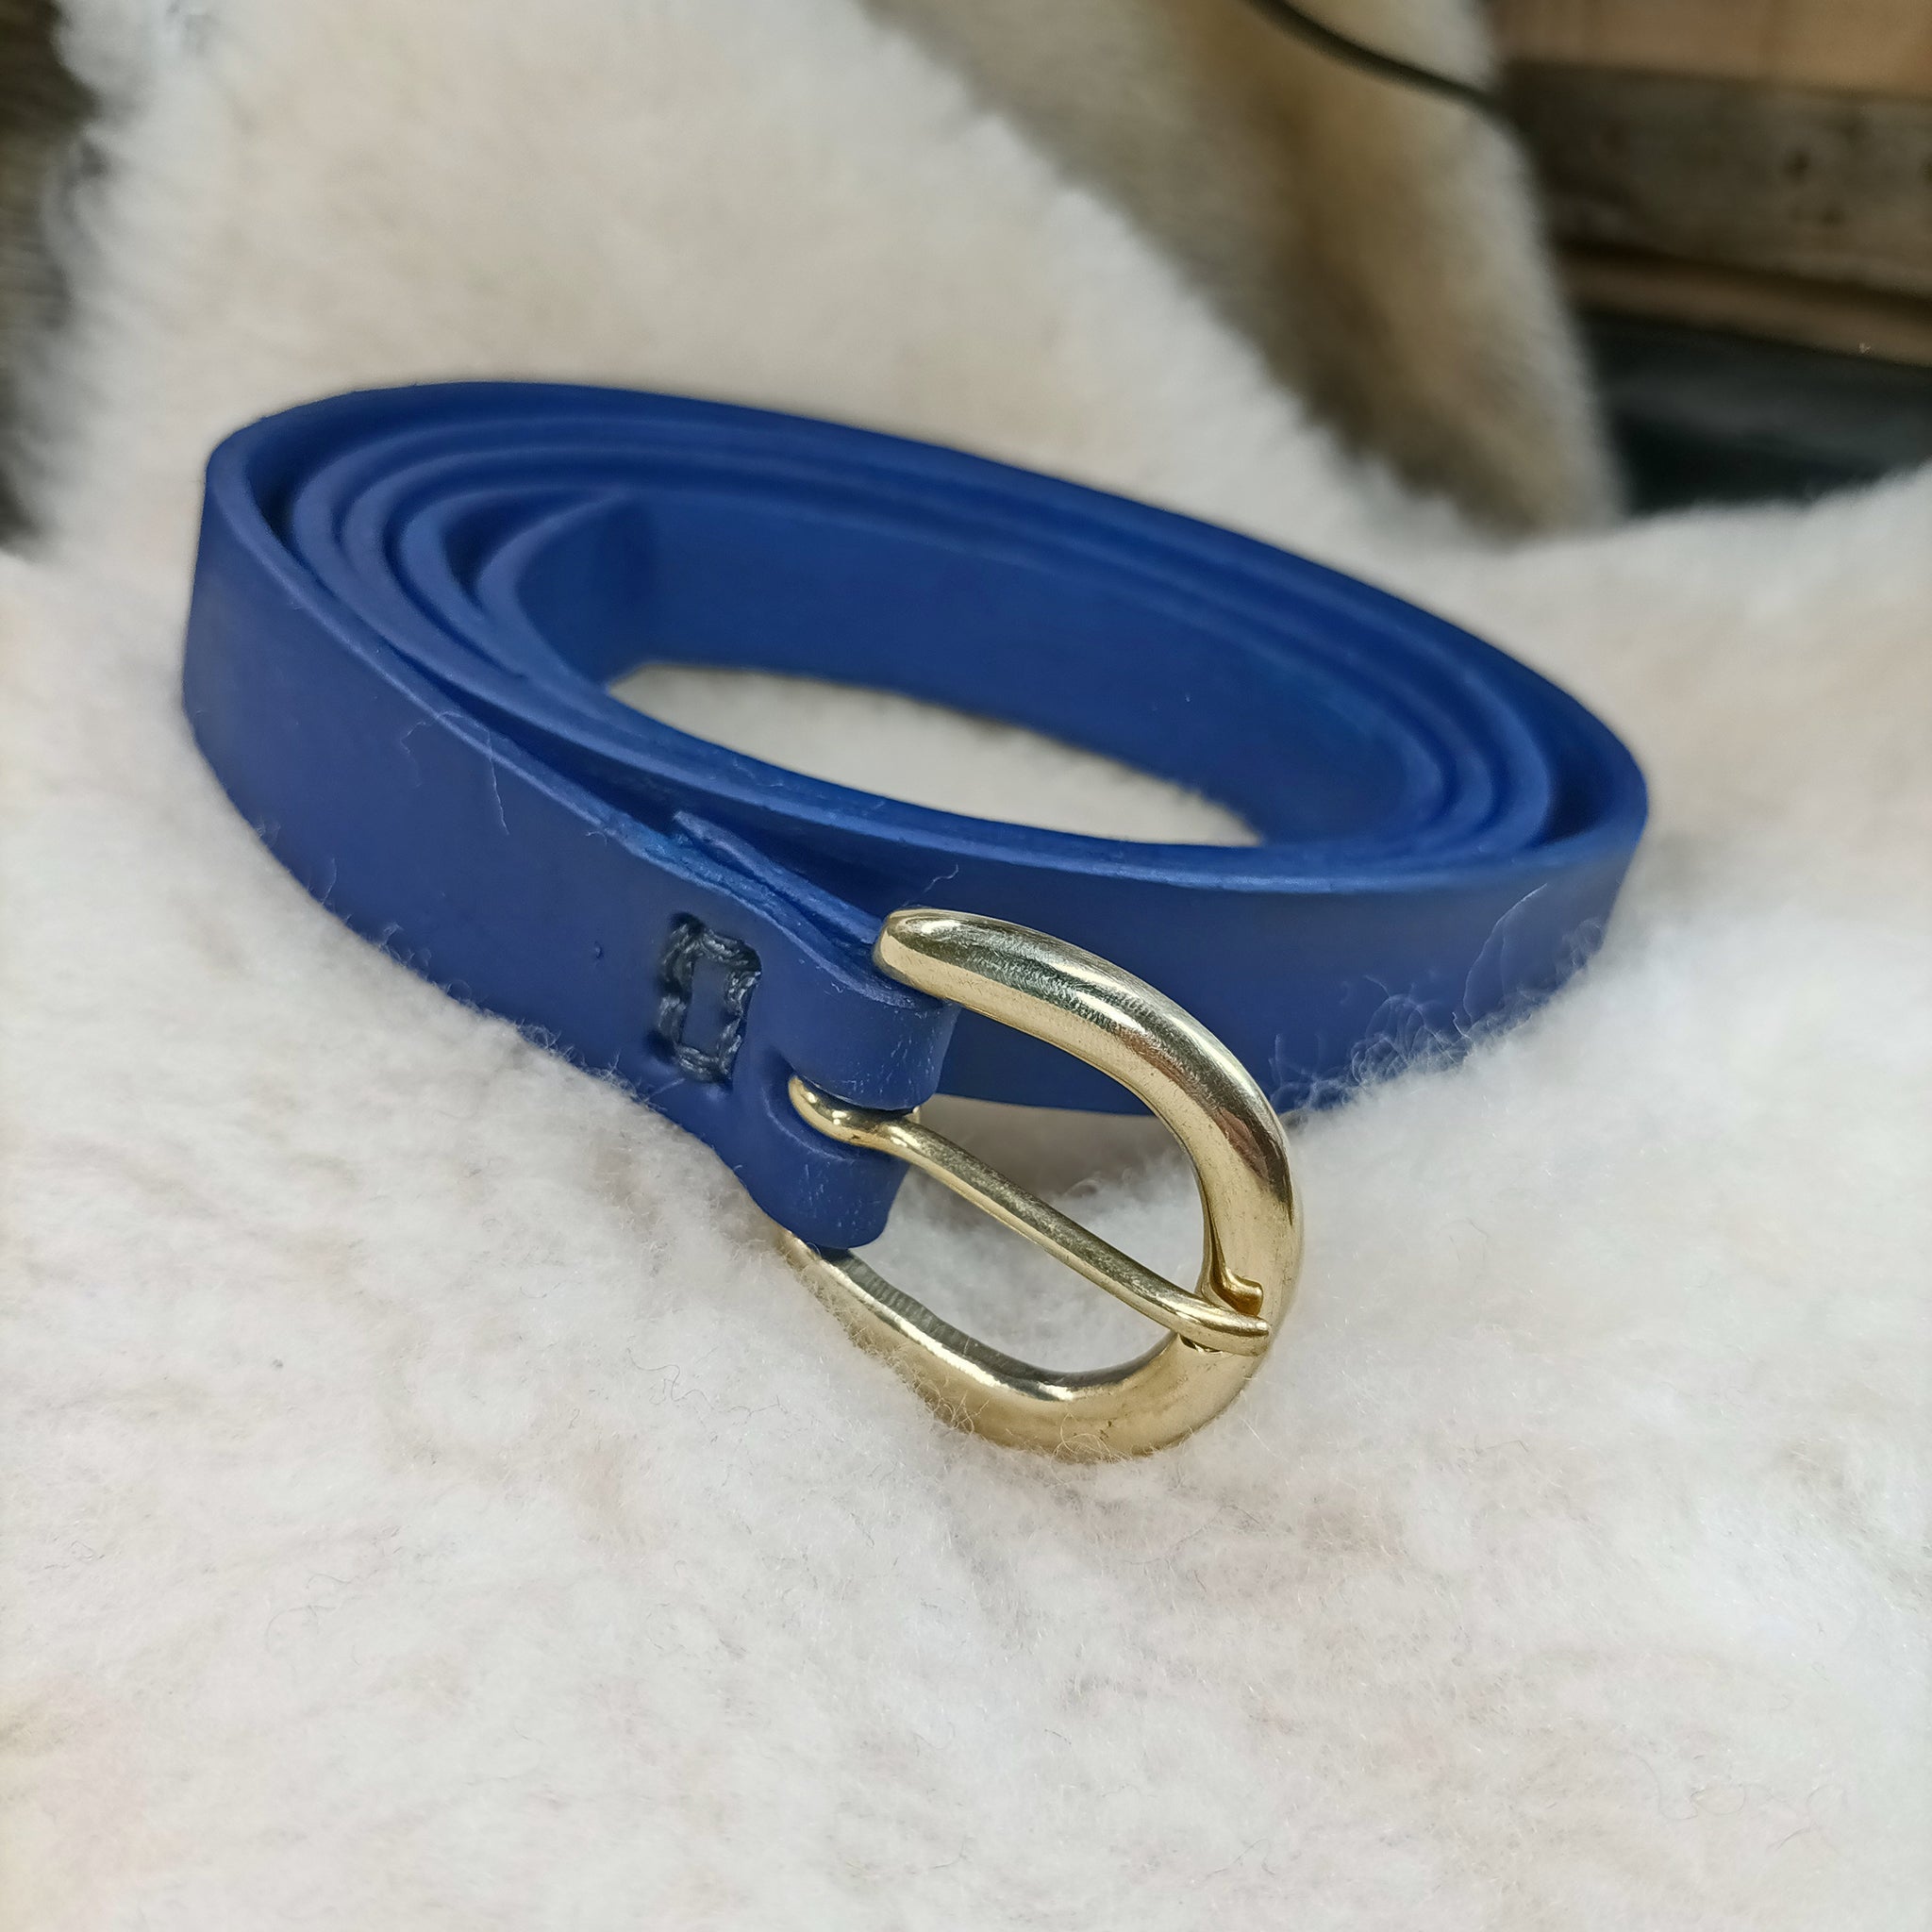 25mm Wide Long Blue Leather Viking Belt with Brass Buckle